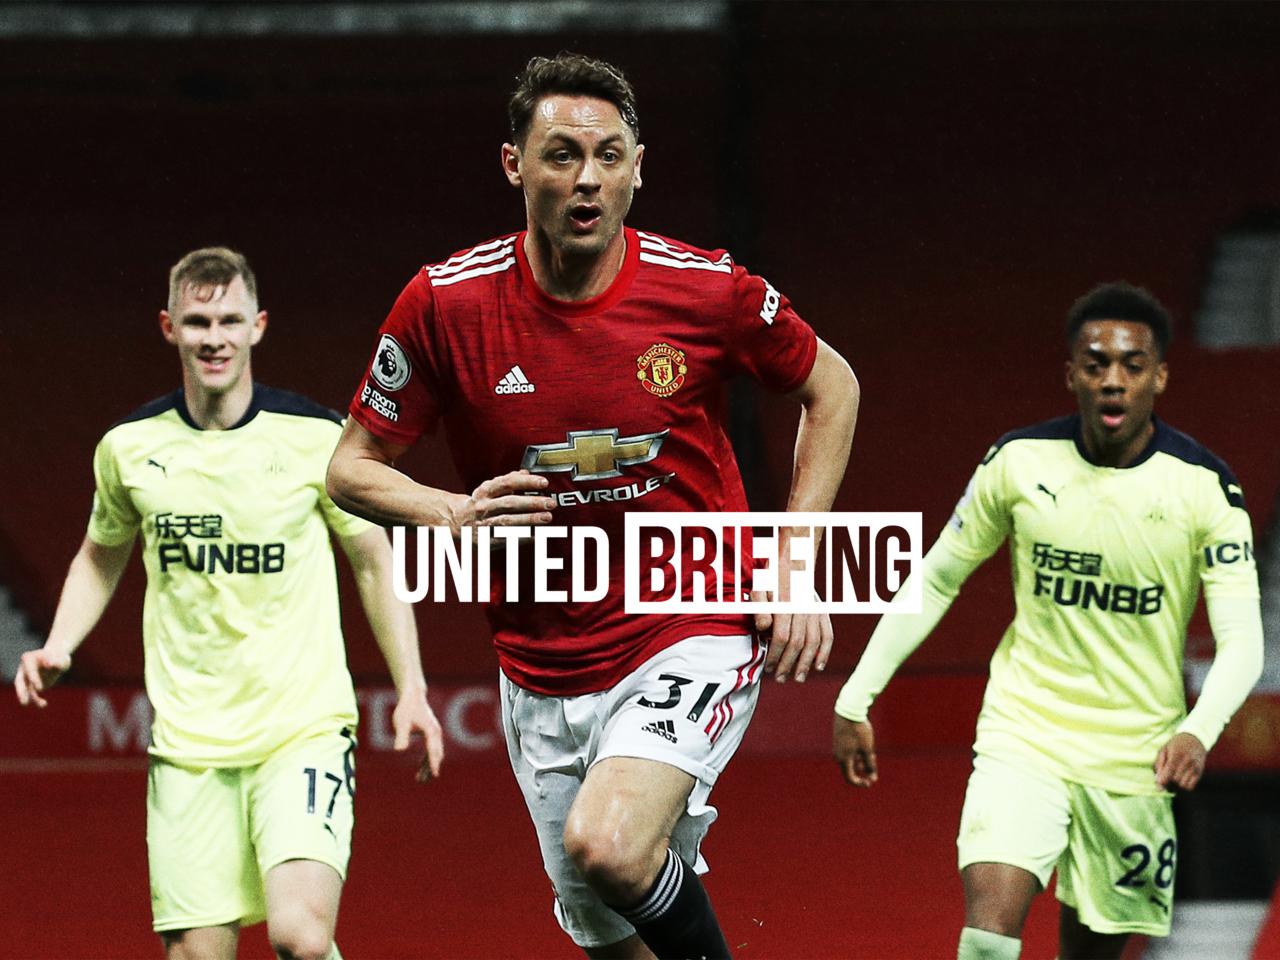 United Briefing Matic Urges United To Take Next Step Towards Europa League Final Manchester United